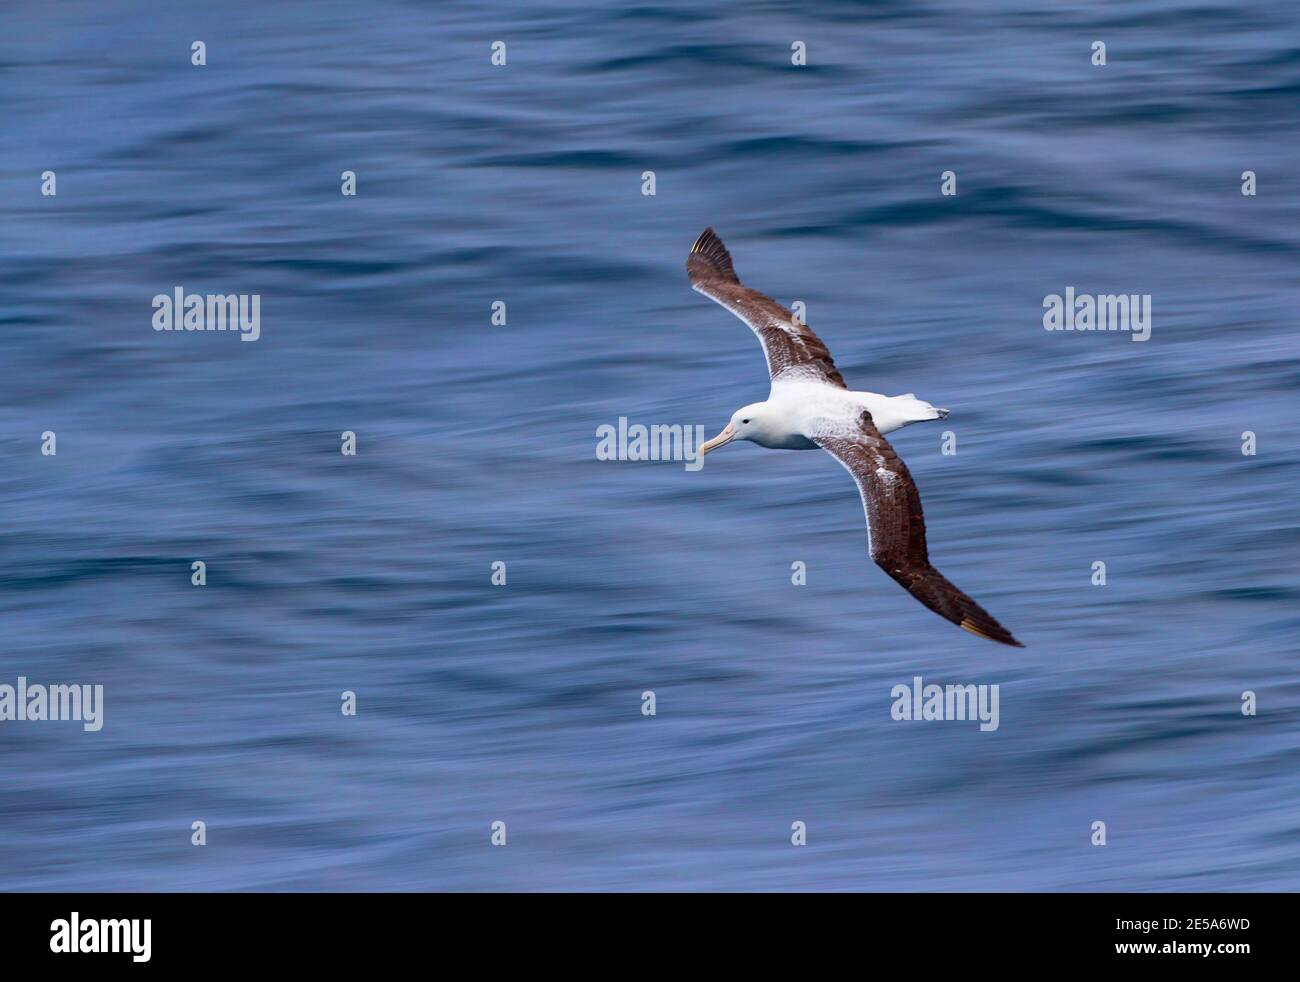 Royal albatross, Southern Royal Albatross (Diomedea epomophora), Adult flying low over the Pacific Ocean between, New Zealand, Auckland islands Stock Photo